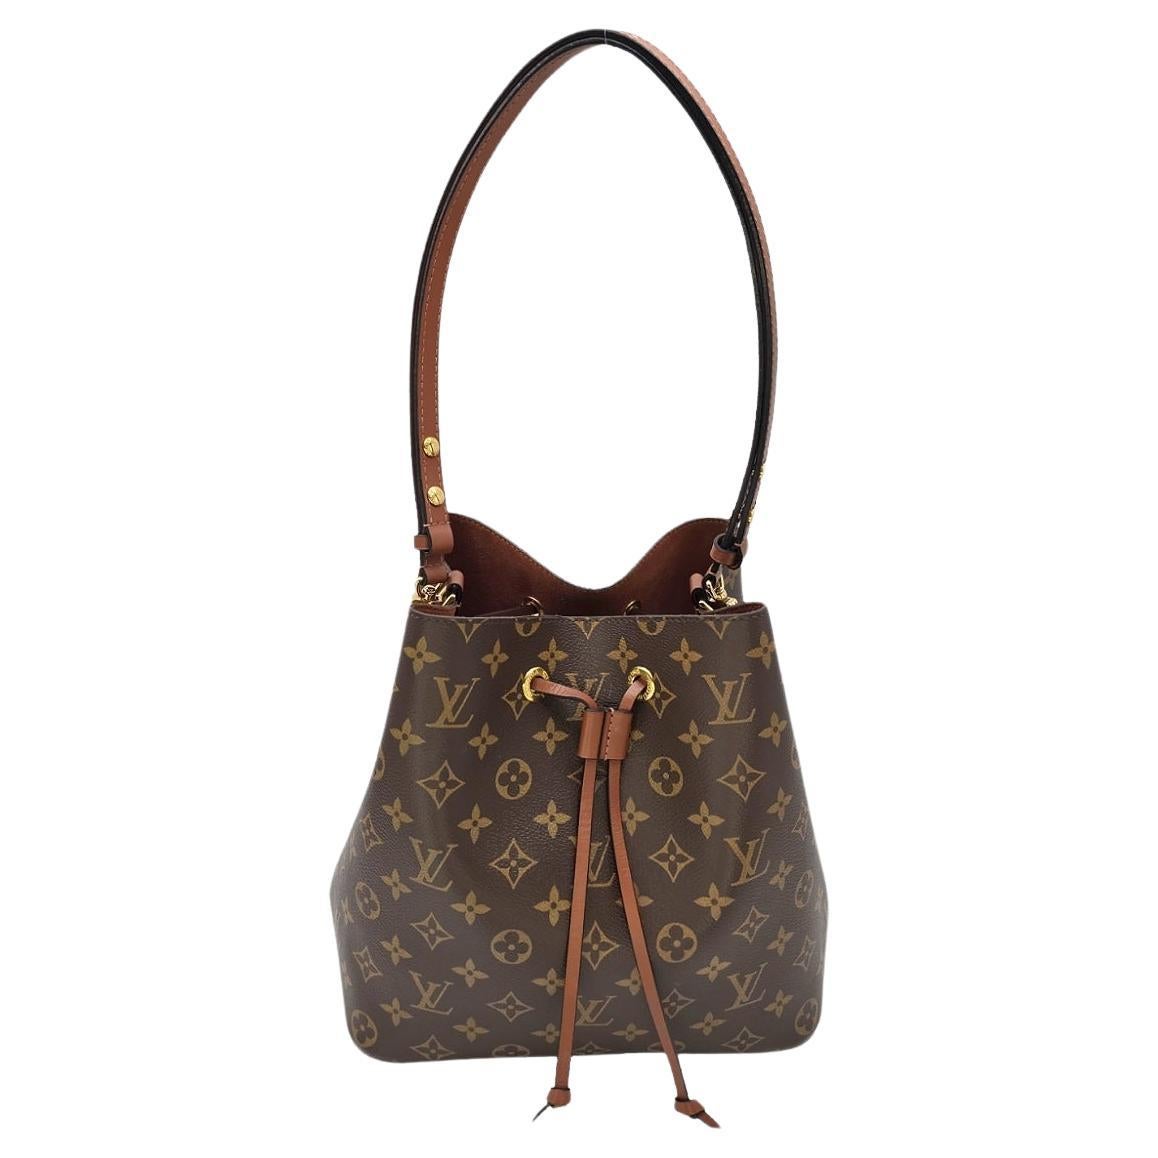 What is the most iconic Louis Vuitton bag?